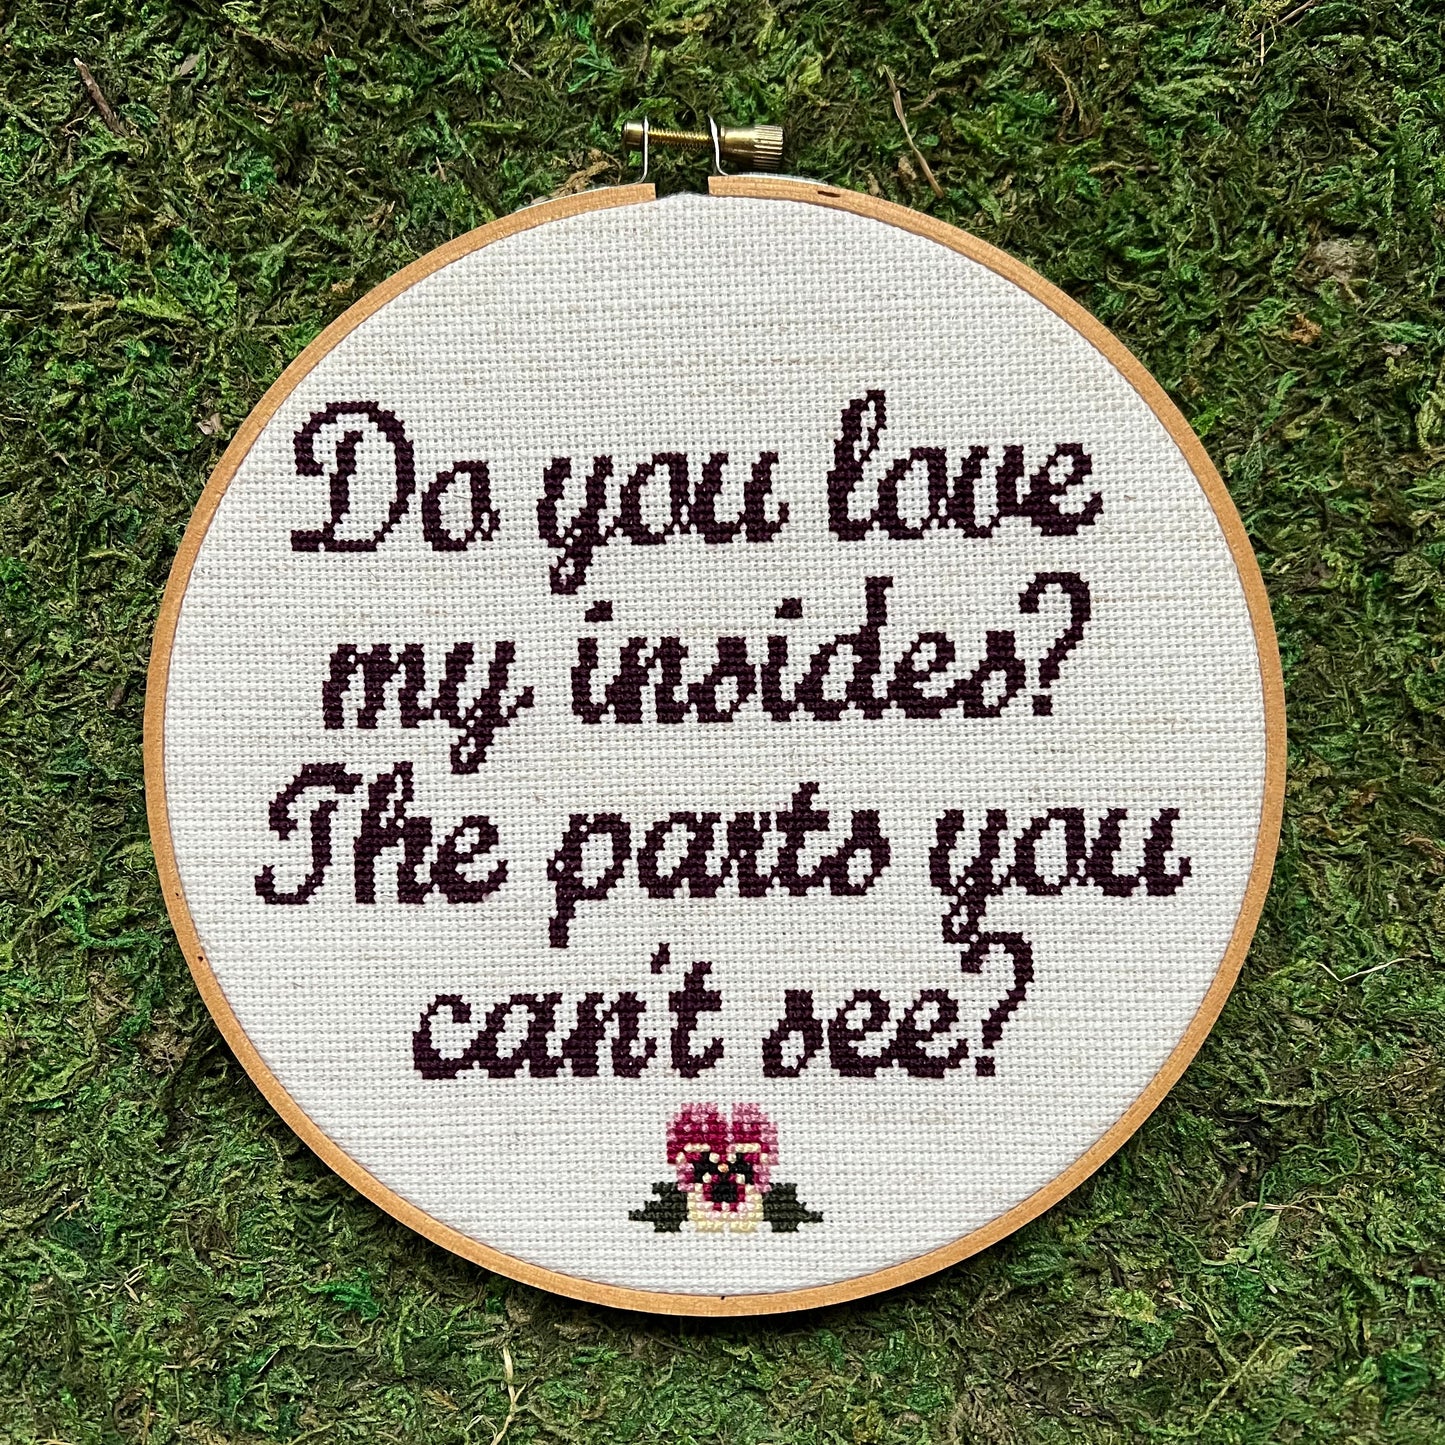 Do You Love My Insides? 7” Hand Stitched Cross Stitch Hoop